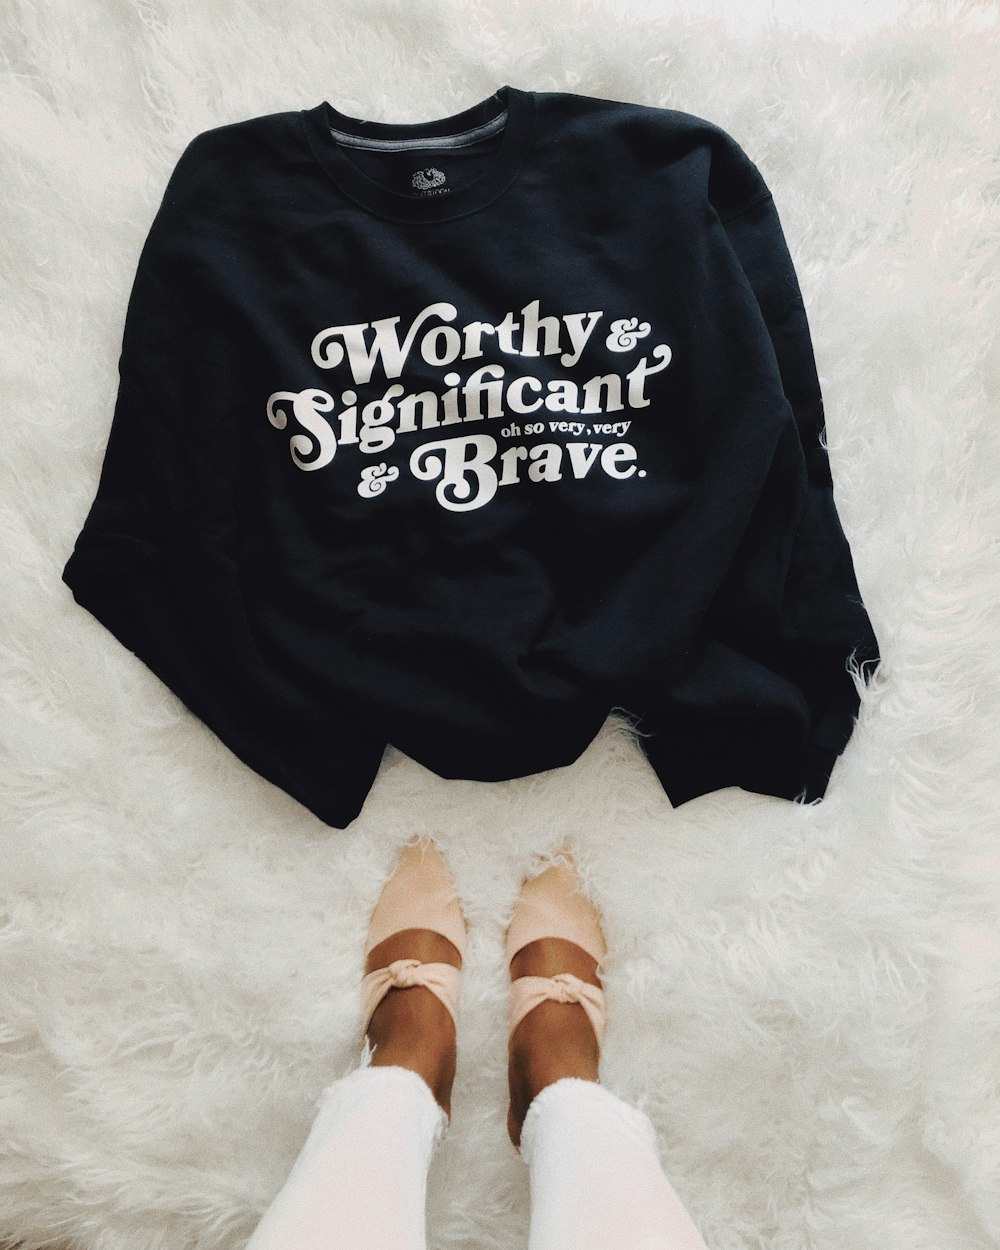 black and white Worthy & Significant & Brave text-printed top